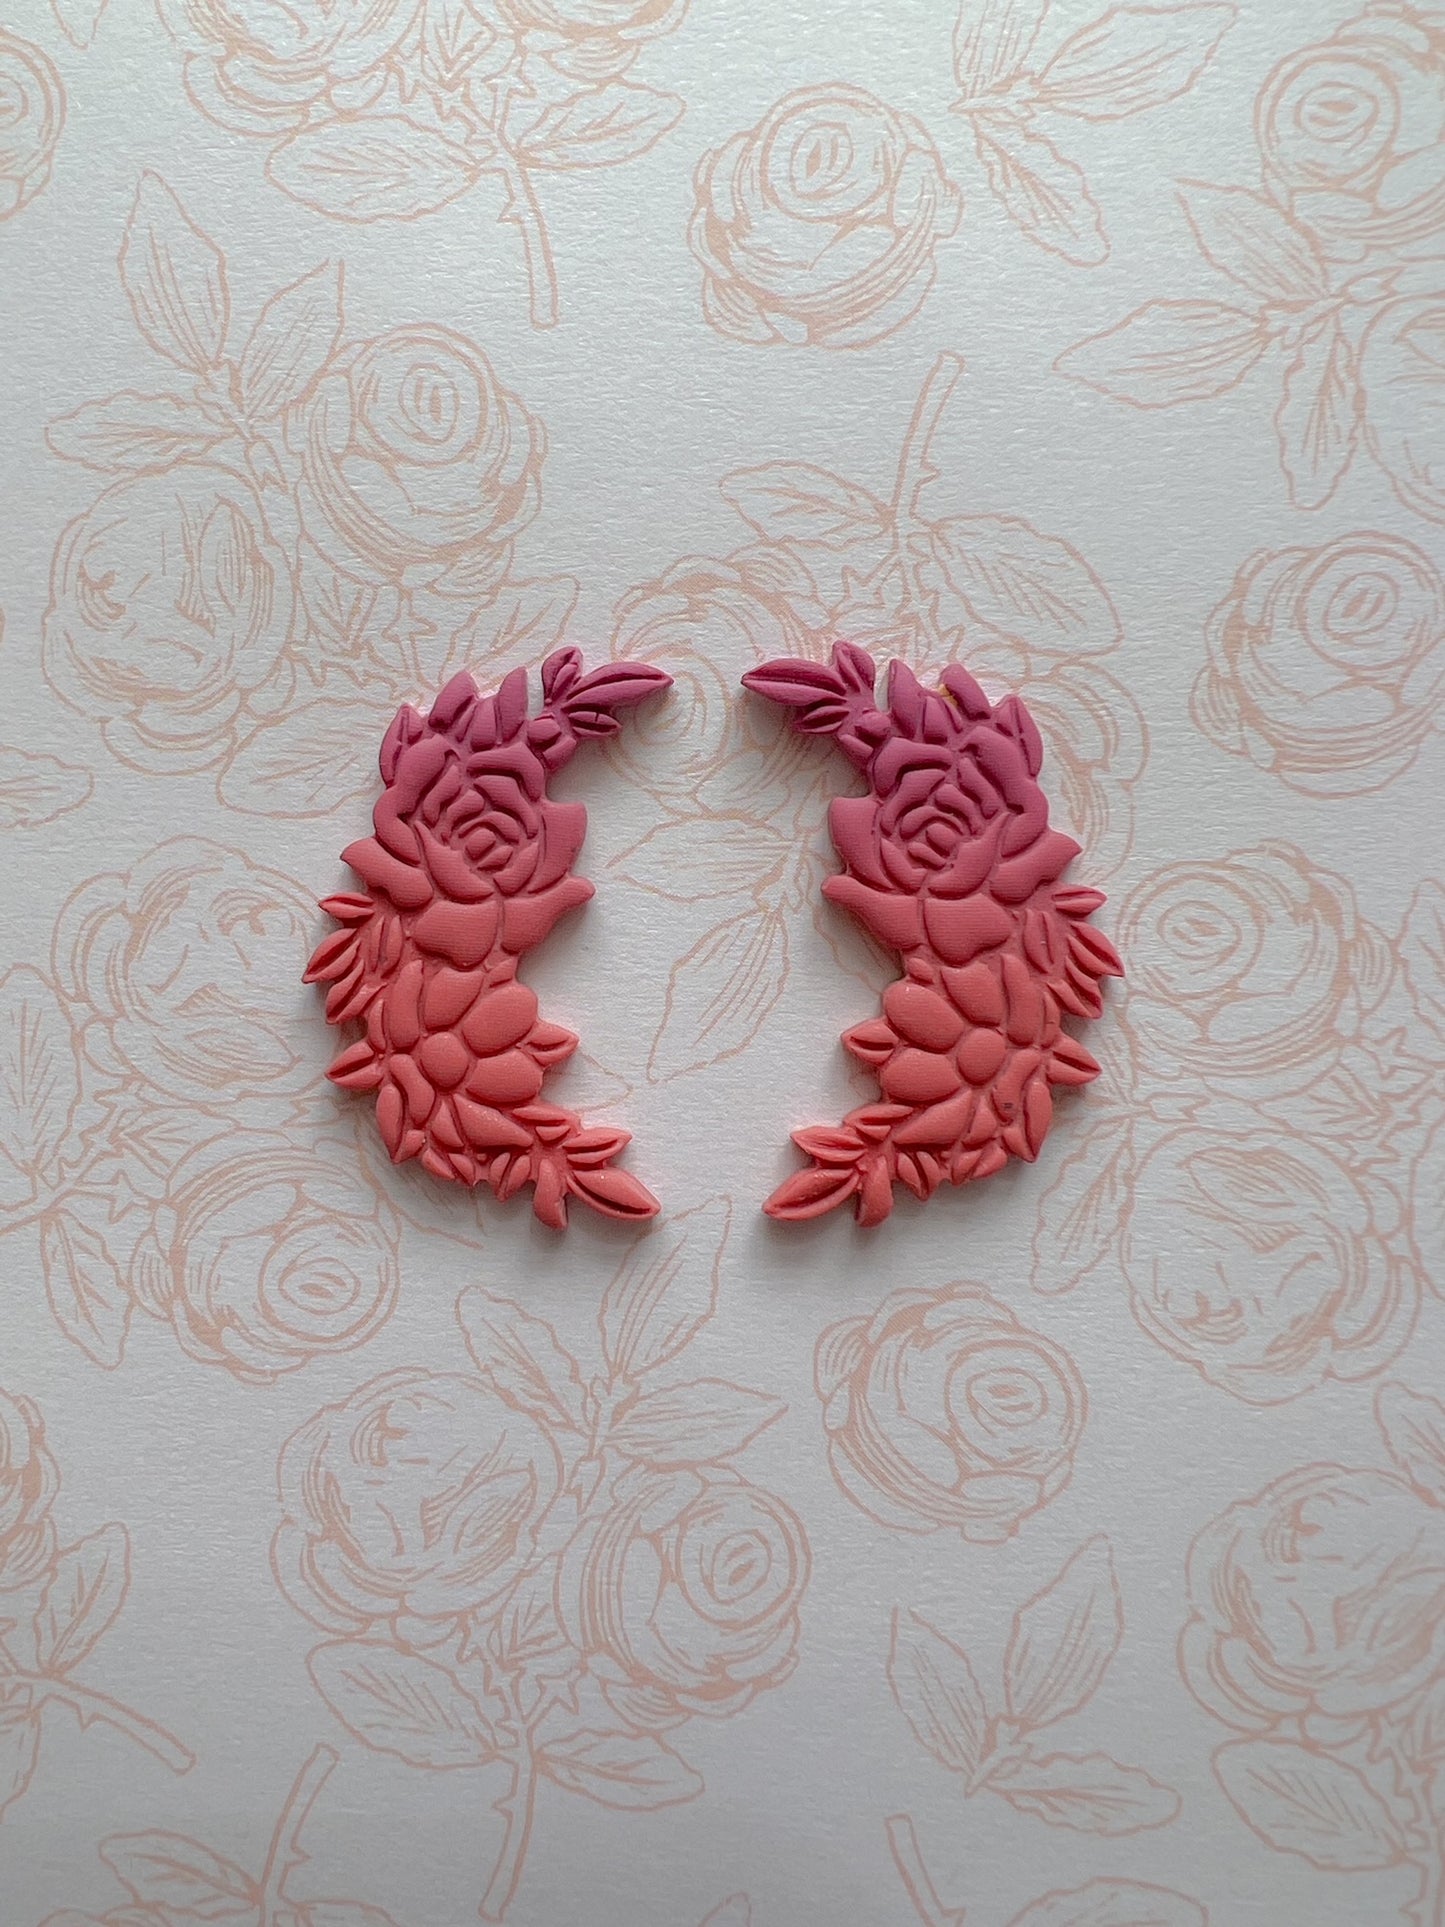 Blooming Crescent Moon Clay Cutters